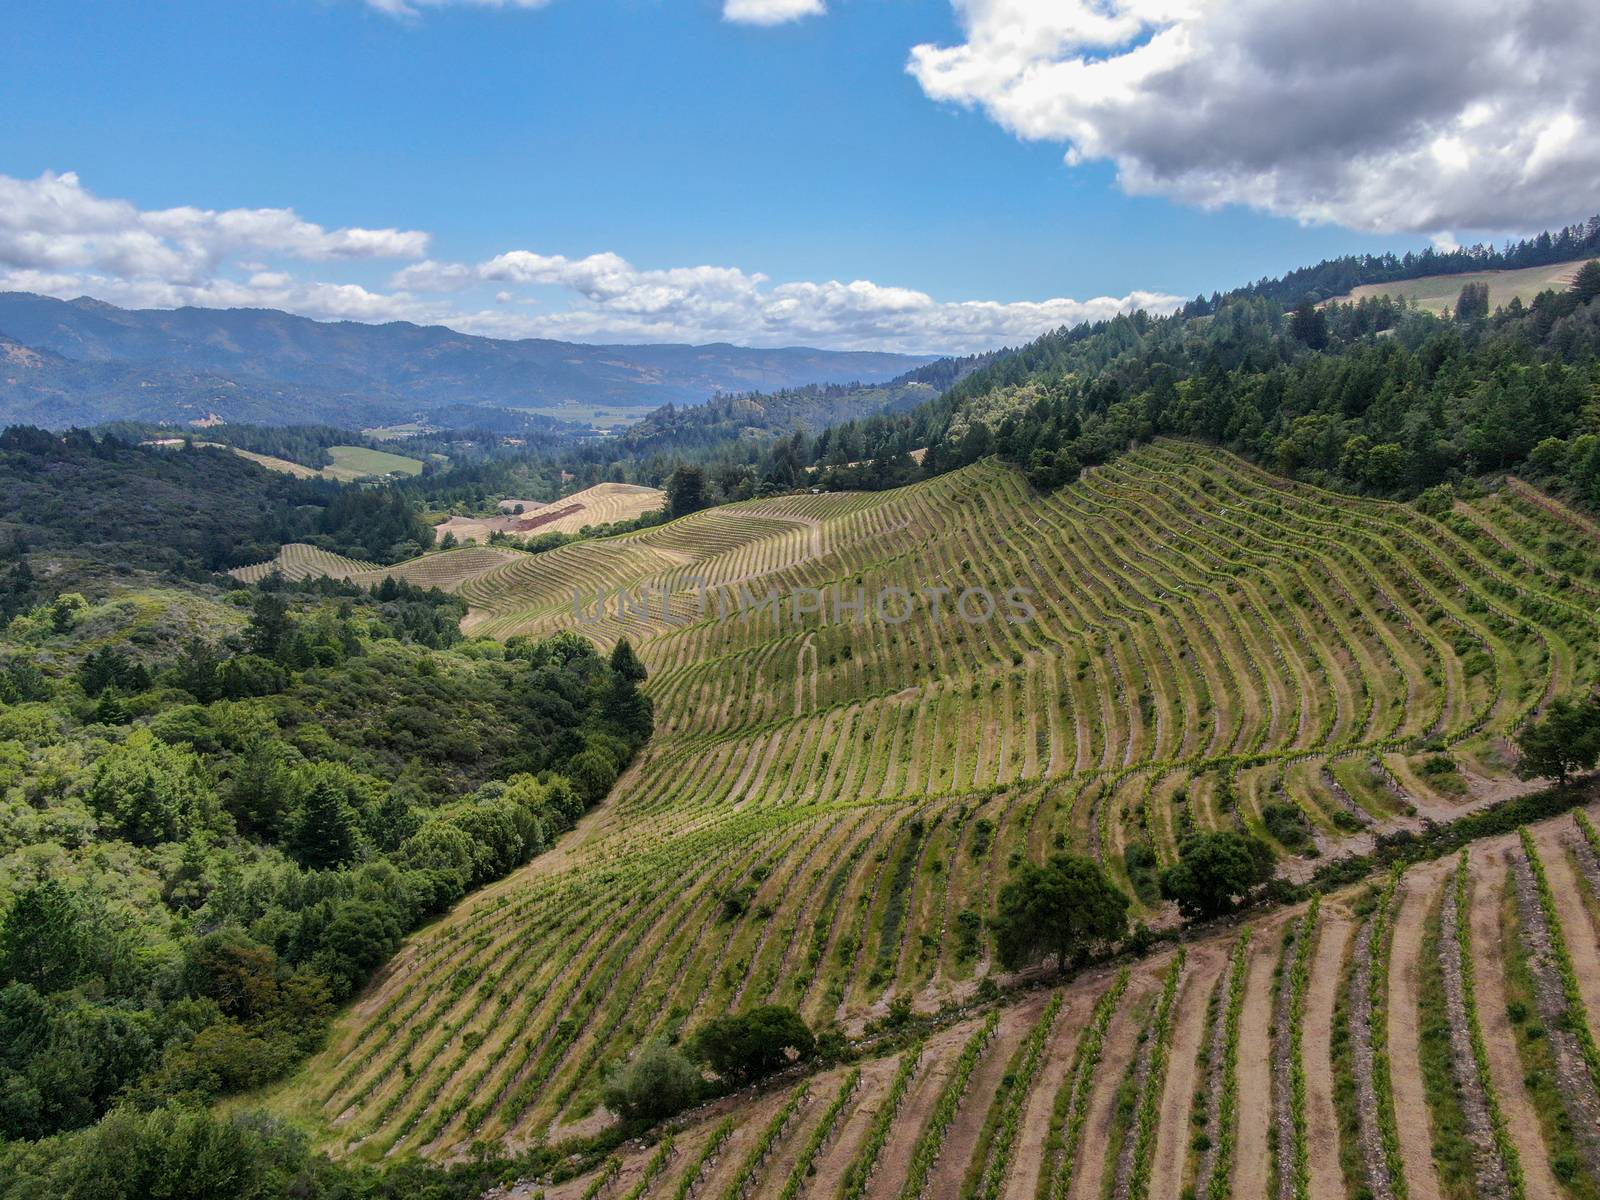 Aerial view of Napa Valley vineyard landscape during summer season. Napa County, in California's Wine Country.